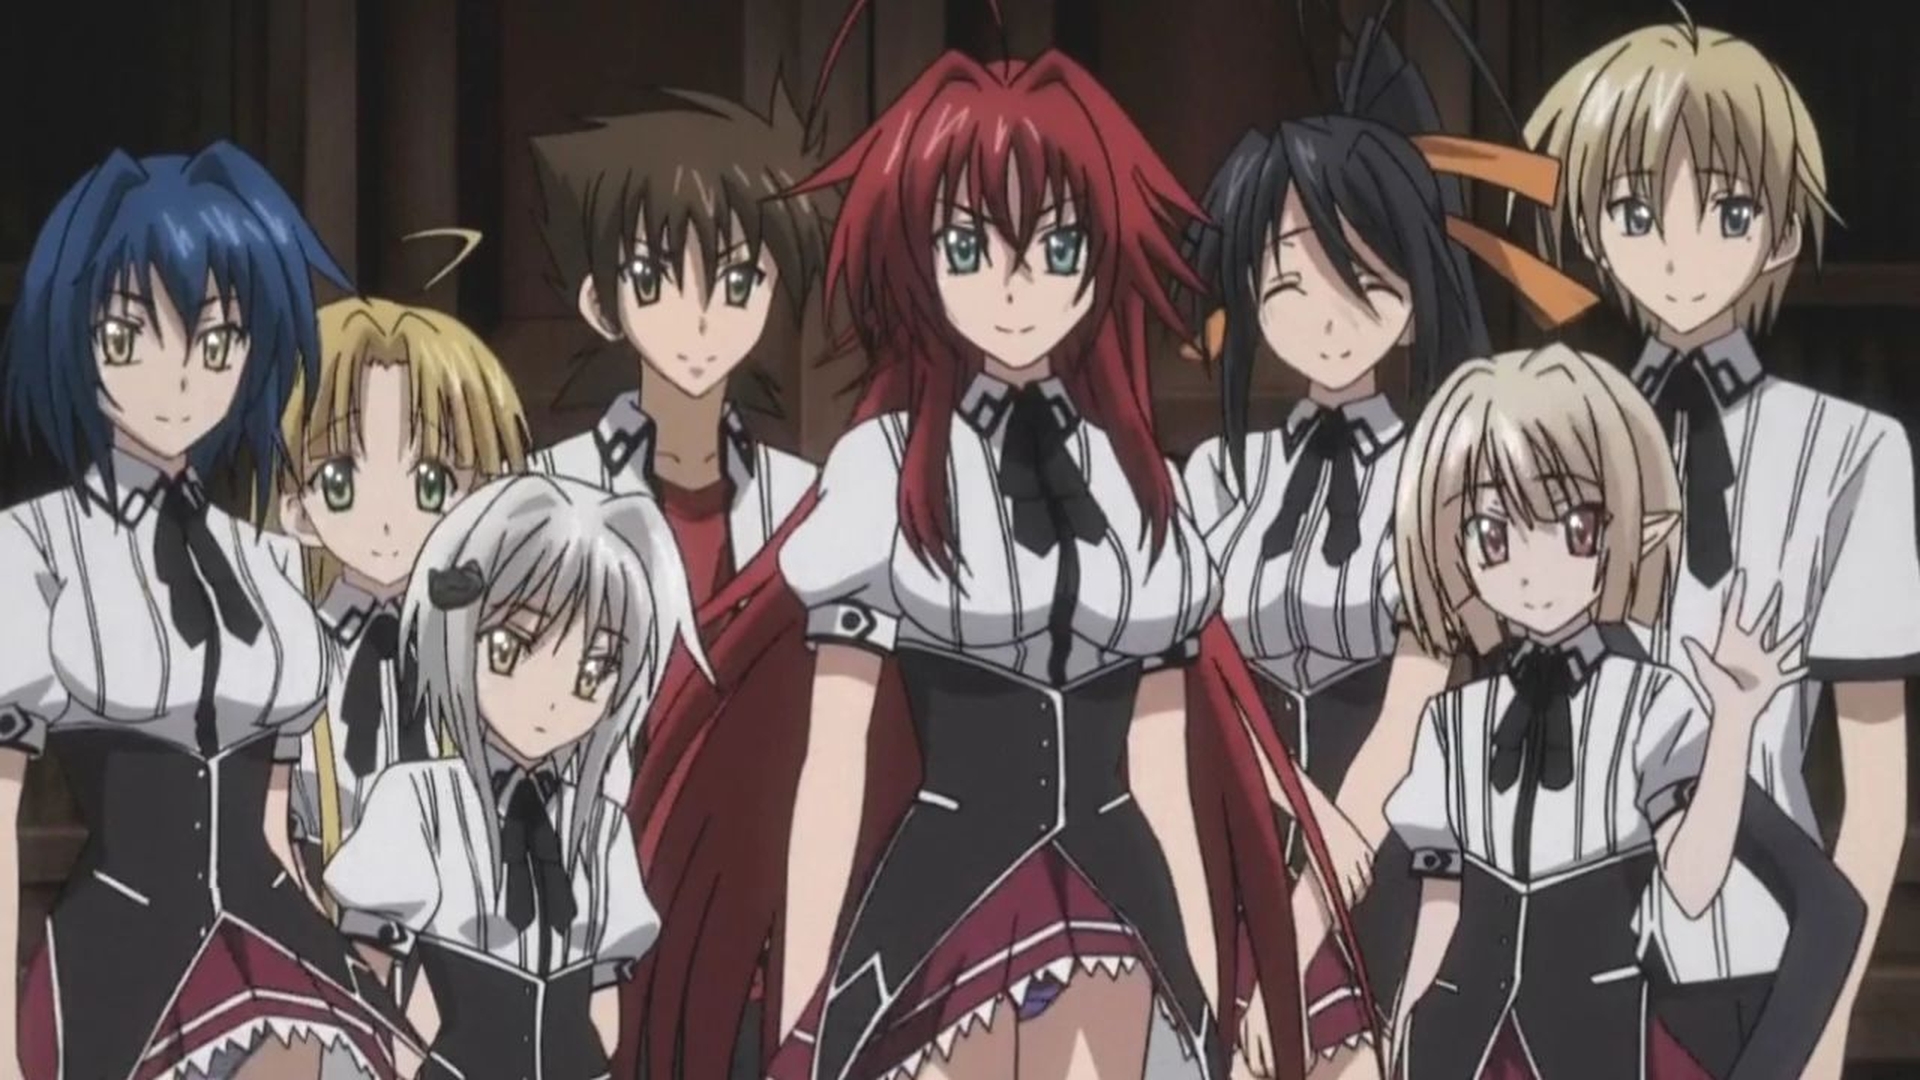 In this article, we are going to be covering Highschool DxD Season 5 release date, plot, and more, so you can learn all there is to know about this beloved anime.